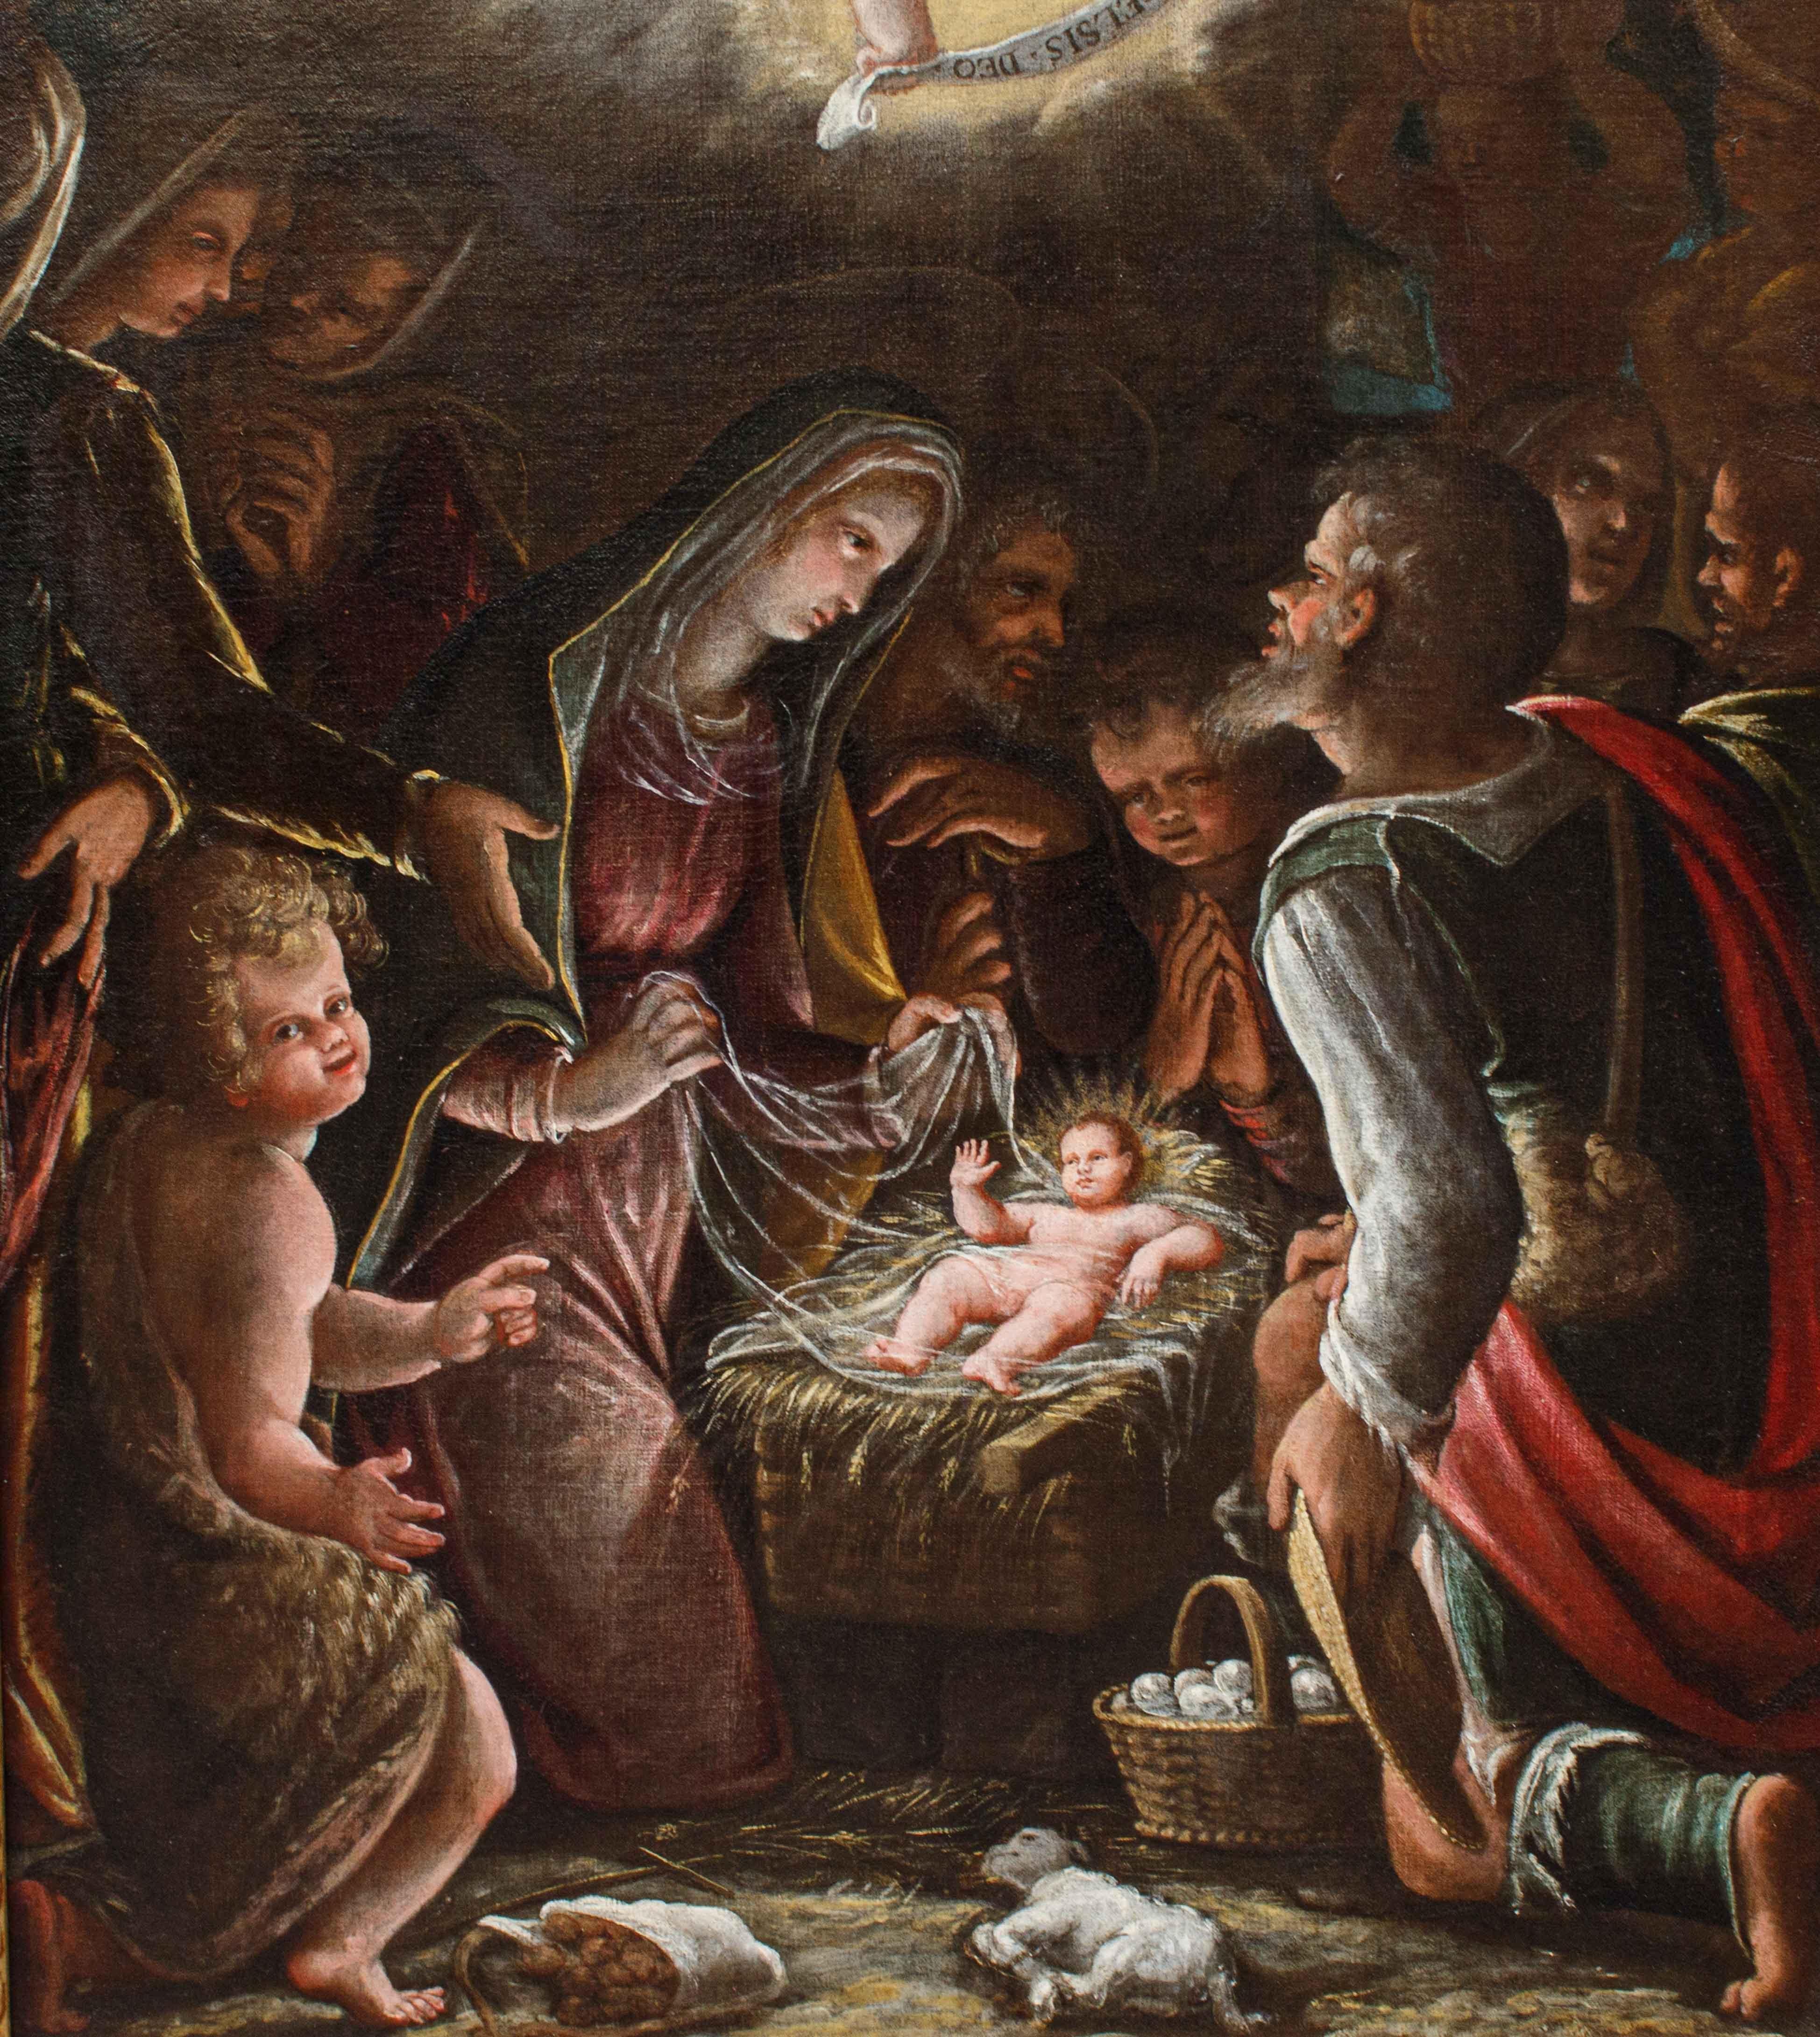 Adoration of the Shepherds Oil painting on canvas attributed to Luca Cattapane For Sale 2